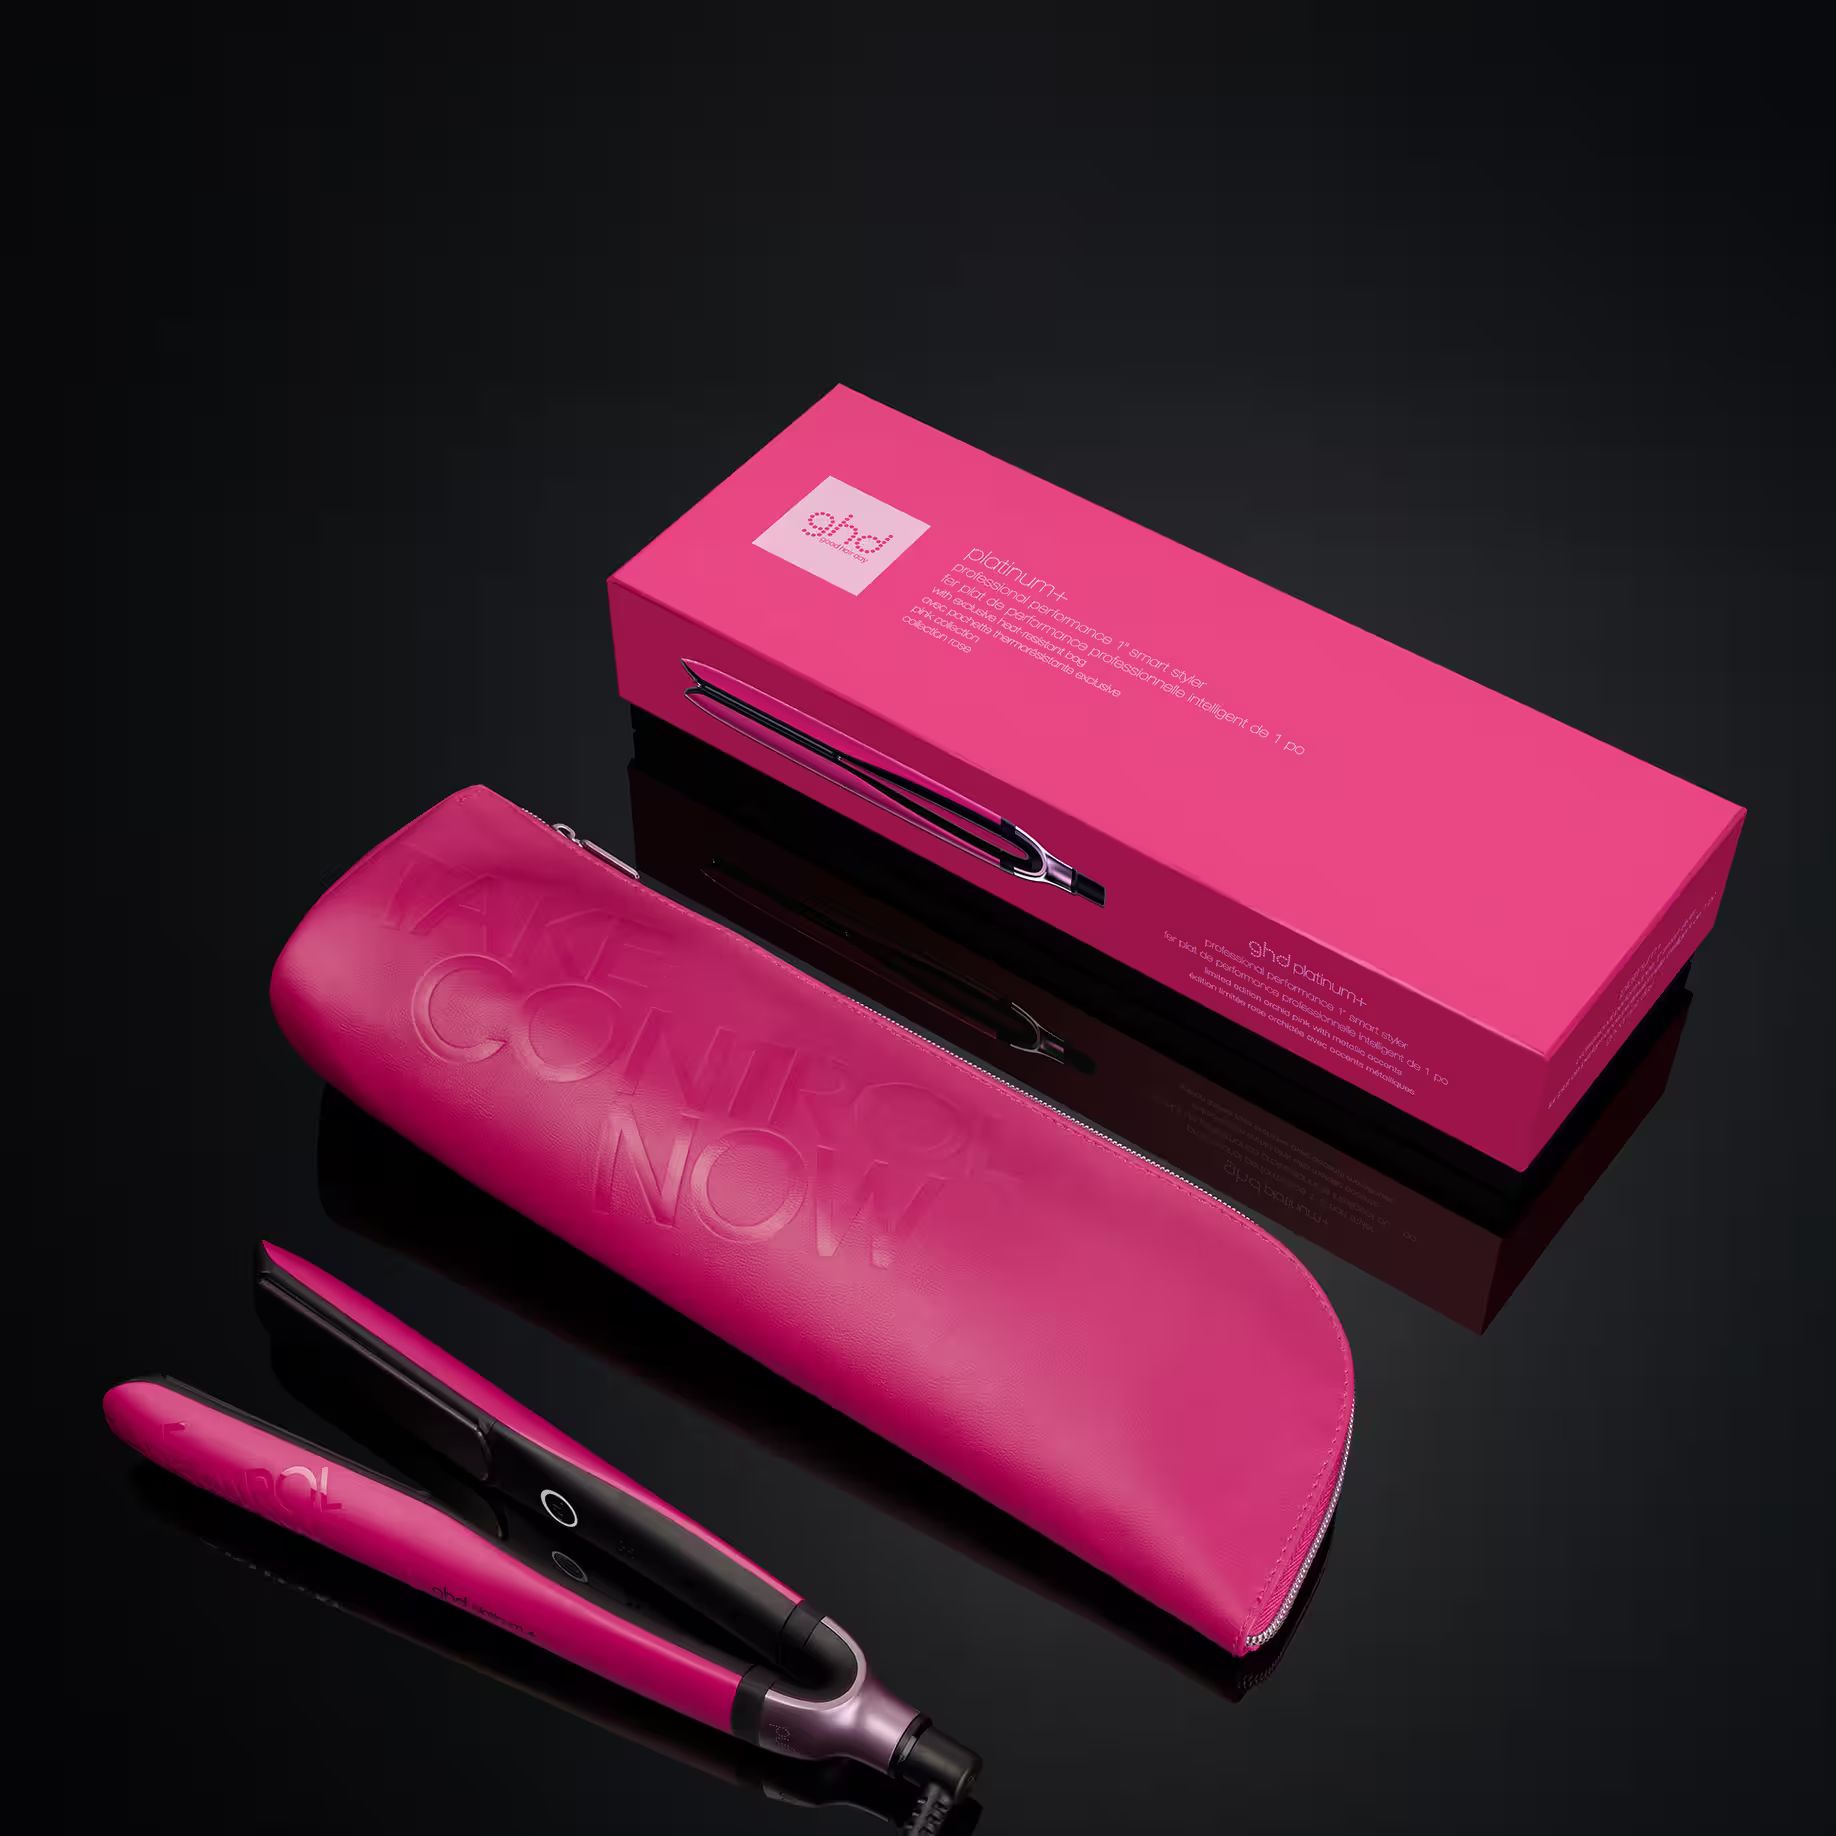 PLATINUM+ STYLER - 1" FLAT IRON, LIMITED EDITION - ORCHID PINK | ghd (US)